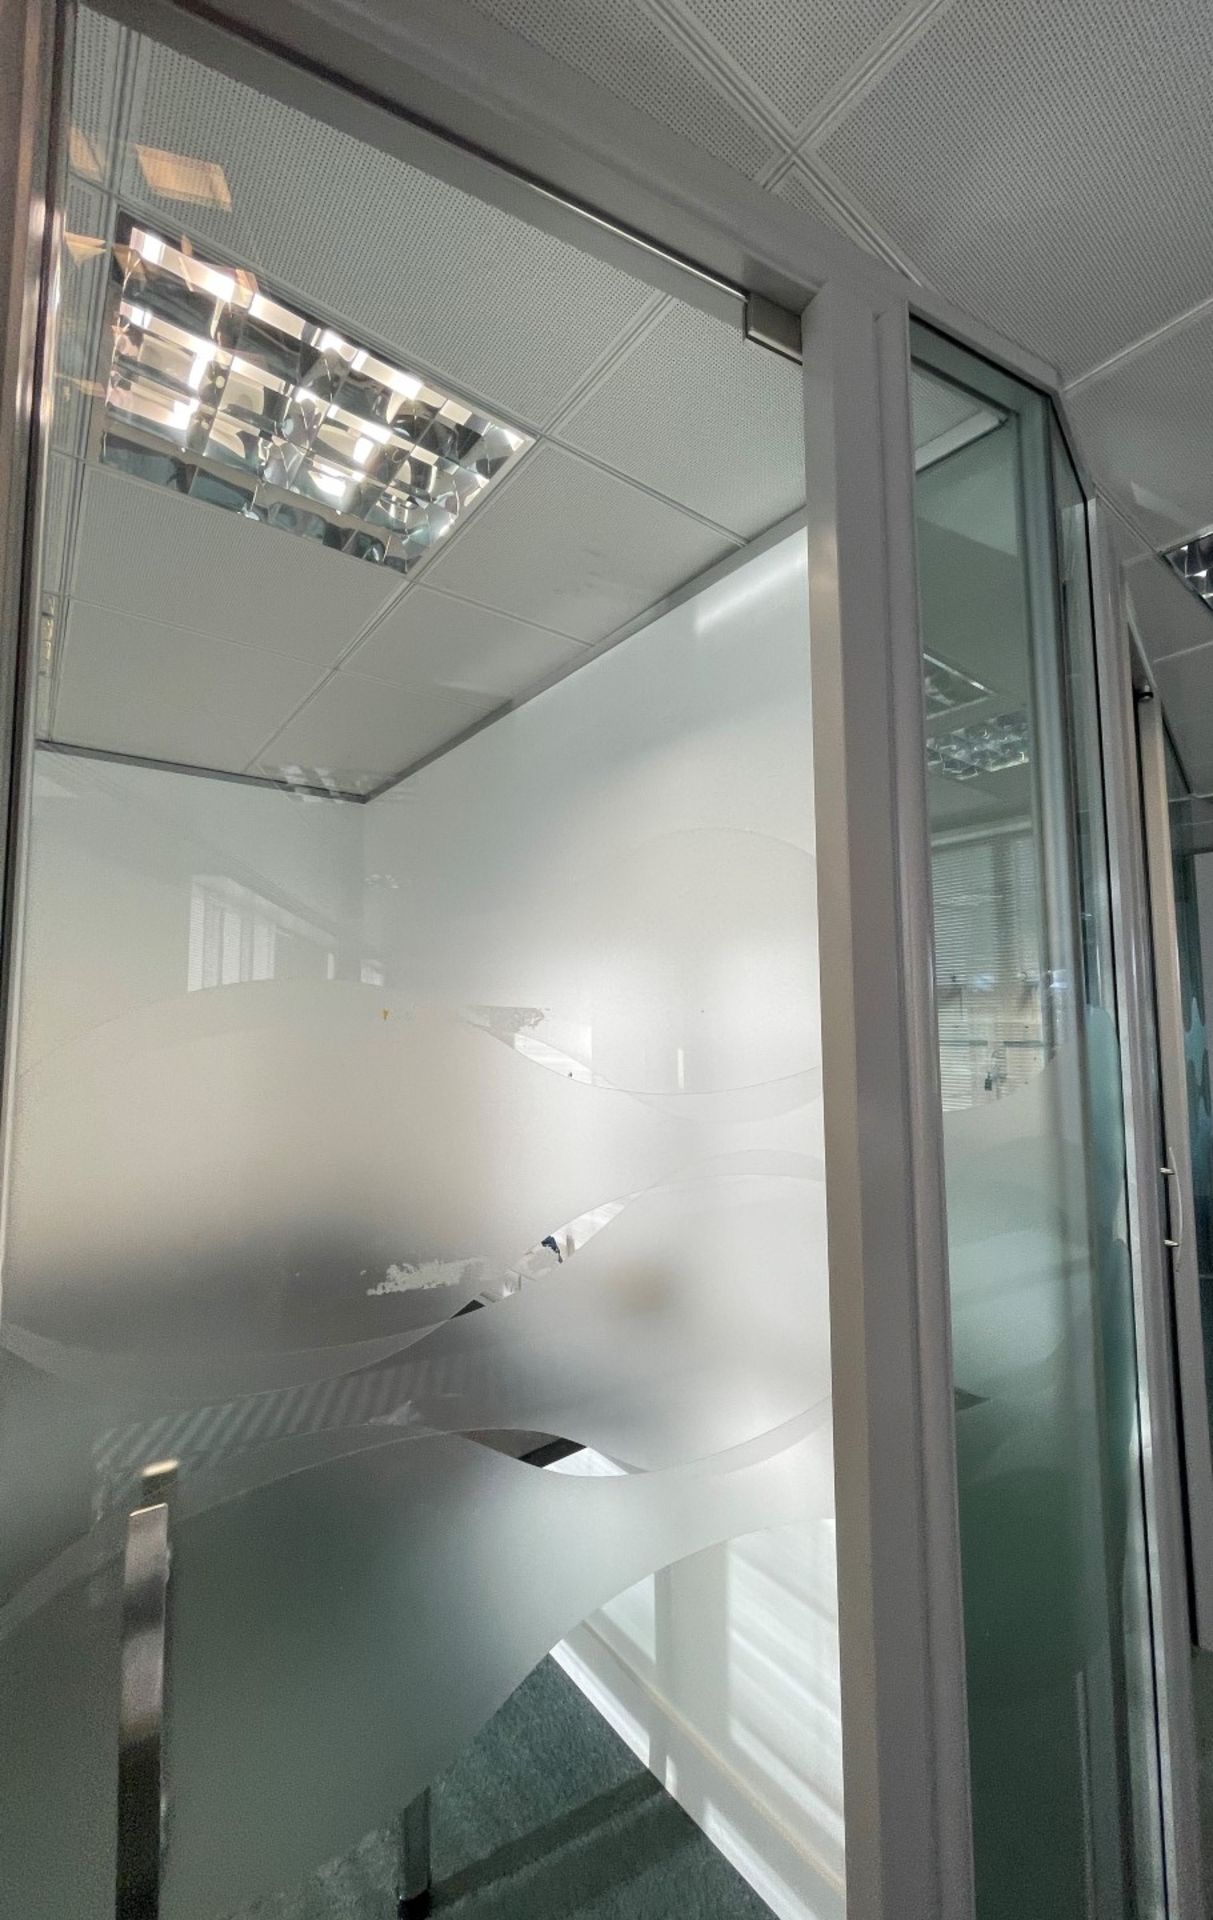 9 x Assorted Glass Office Dividers Panels With 2 x Glass Doors - Currently Covering 2 Offices - Image 8 of 11